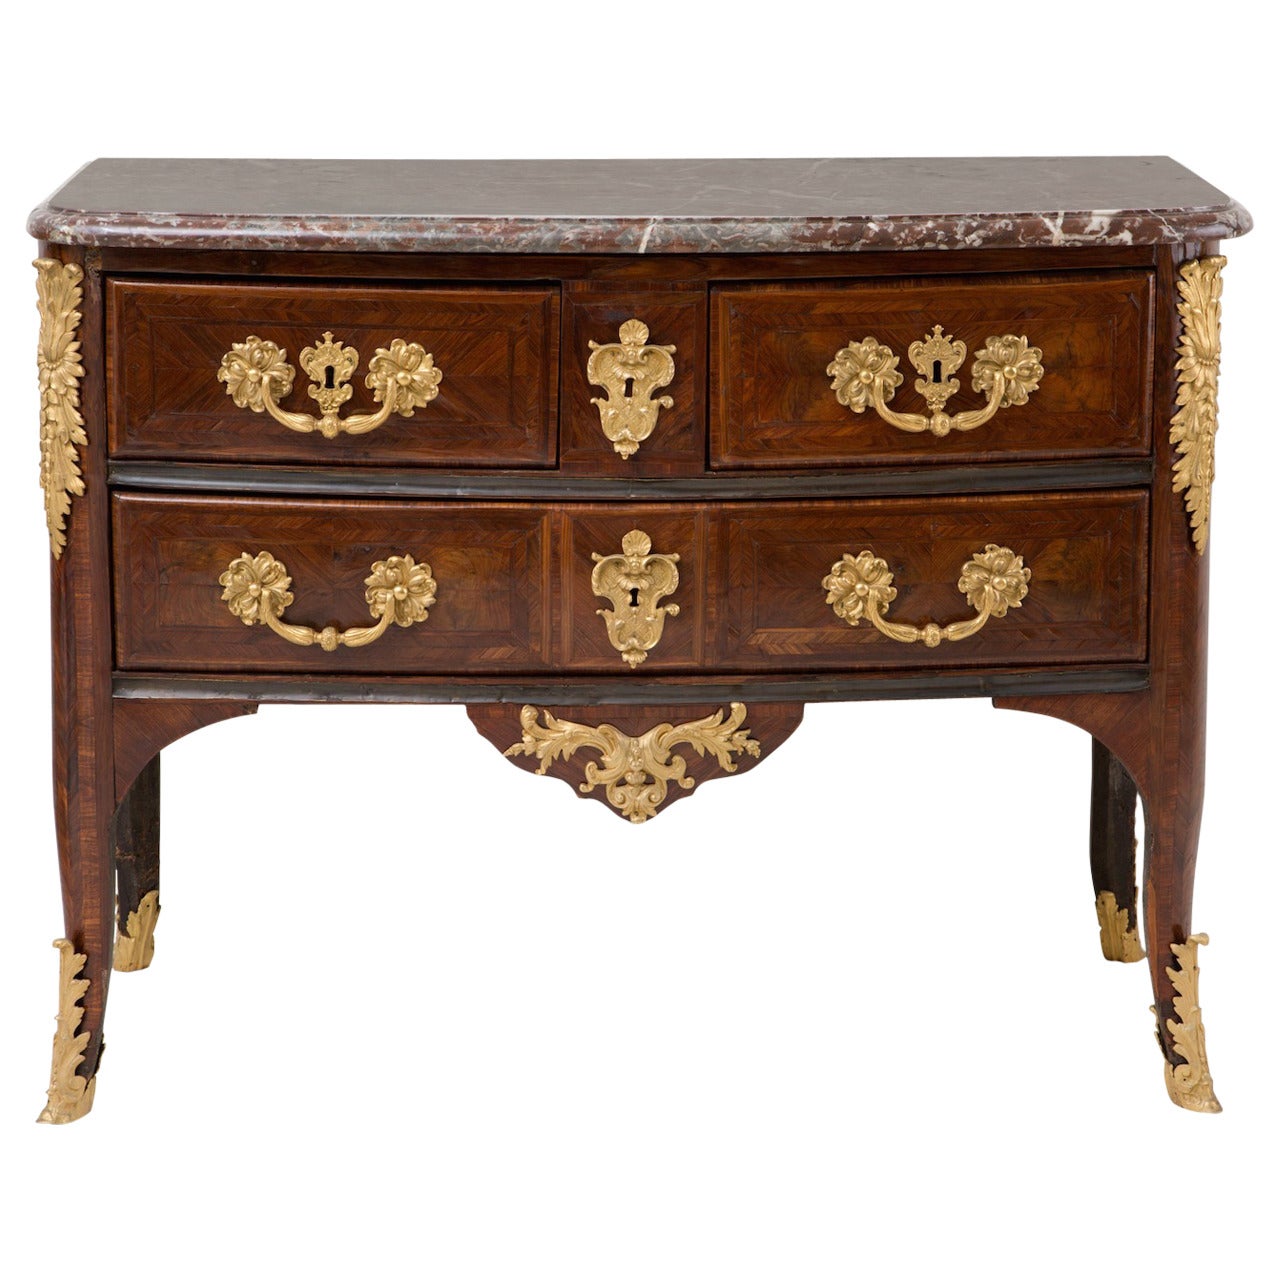 French RéGence Ormolu-Mounted Amaranth Parquetry Commode For Sale